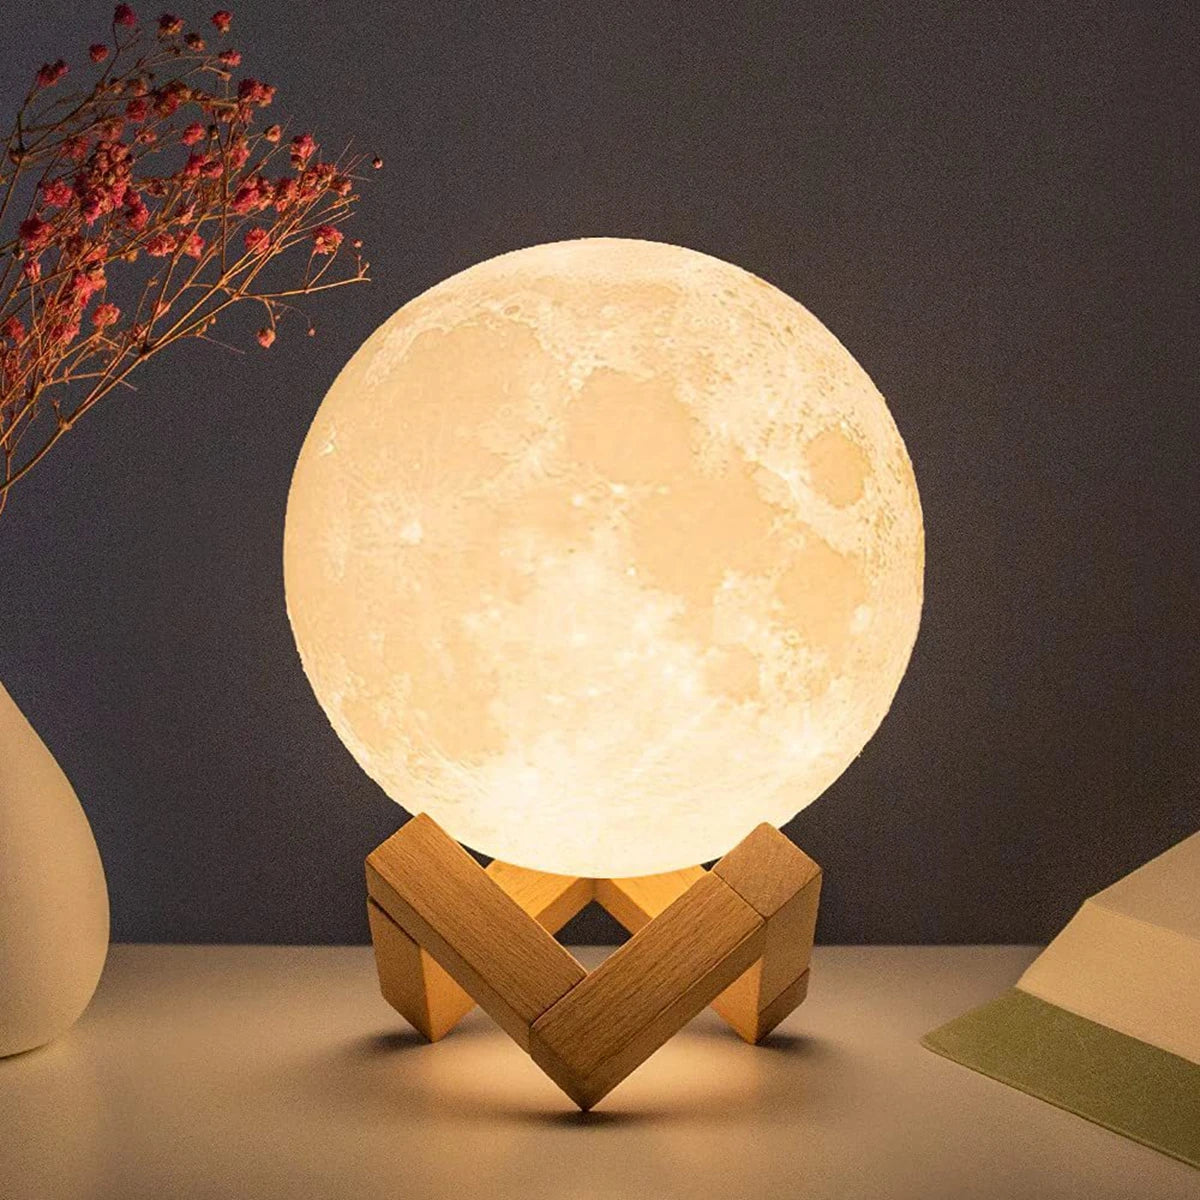 D5 8Cm Moon Lamp LED Night Light Battery Powered with Stand Starry Lamp Bedroom Decor Night Lights Kids Gift Moon Lamp Xmas Gift